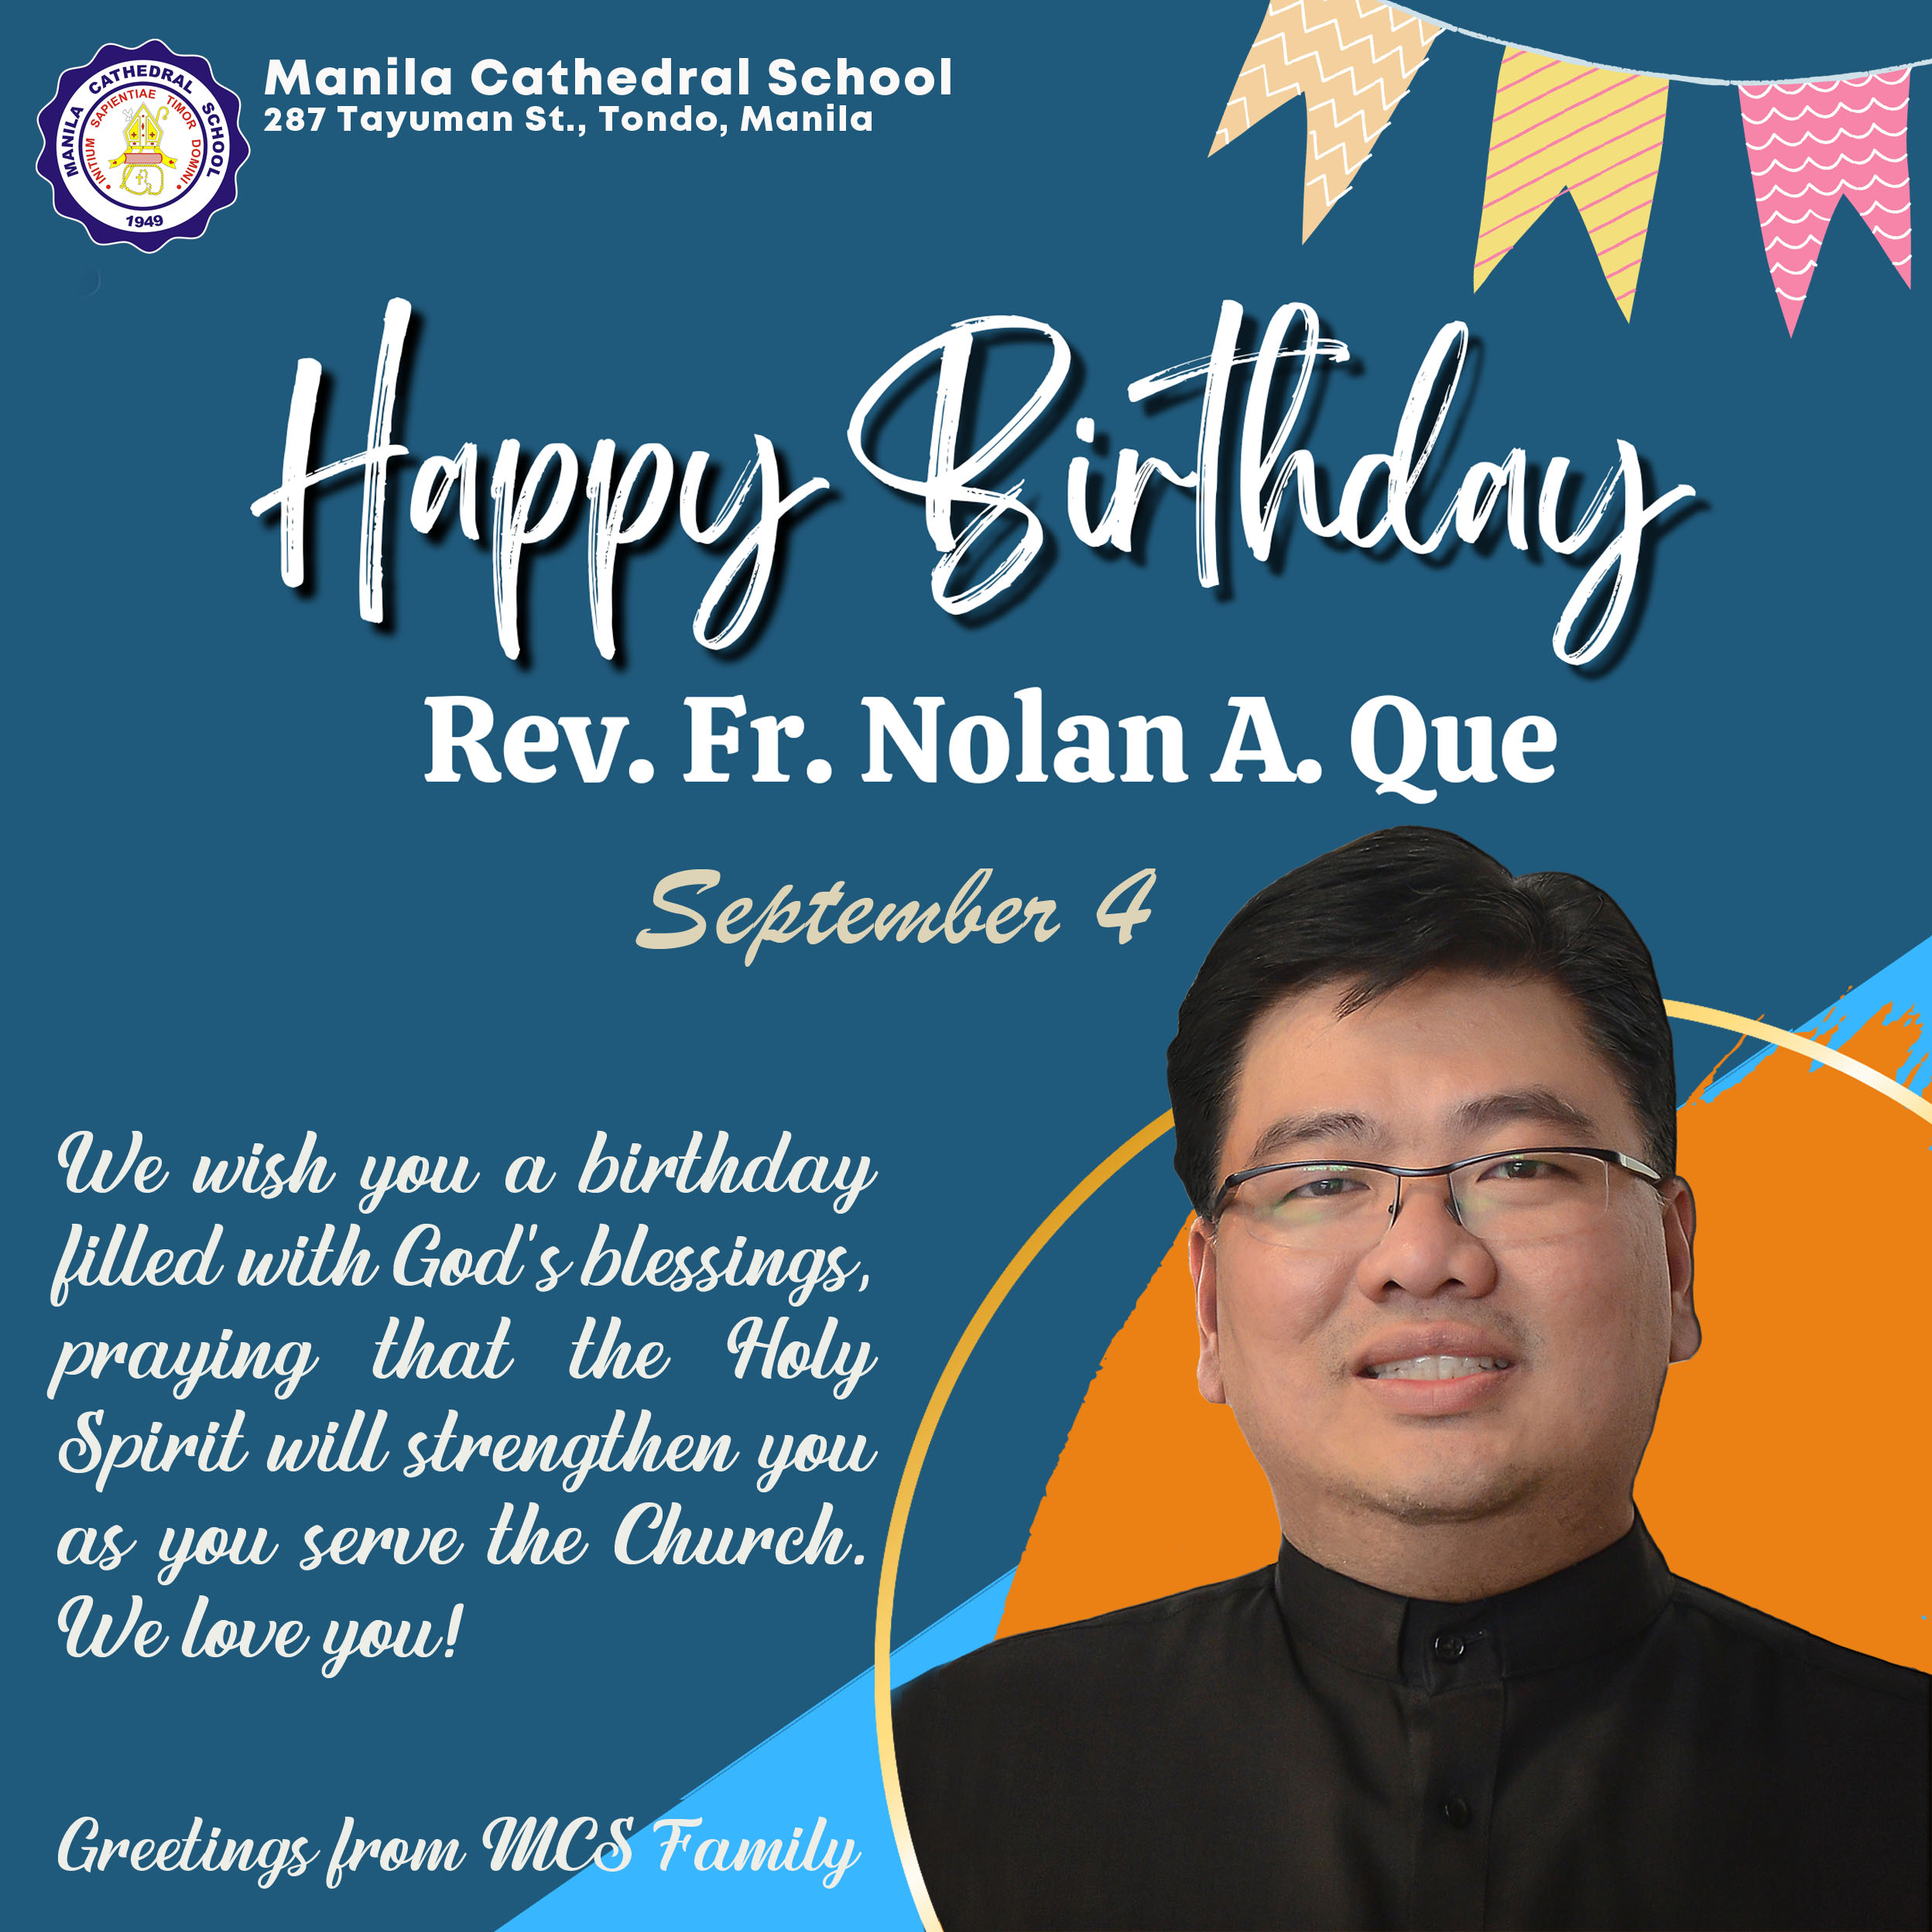 Have a happy and blessed birthday, Rev. Fr. Nolan A. Que